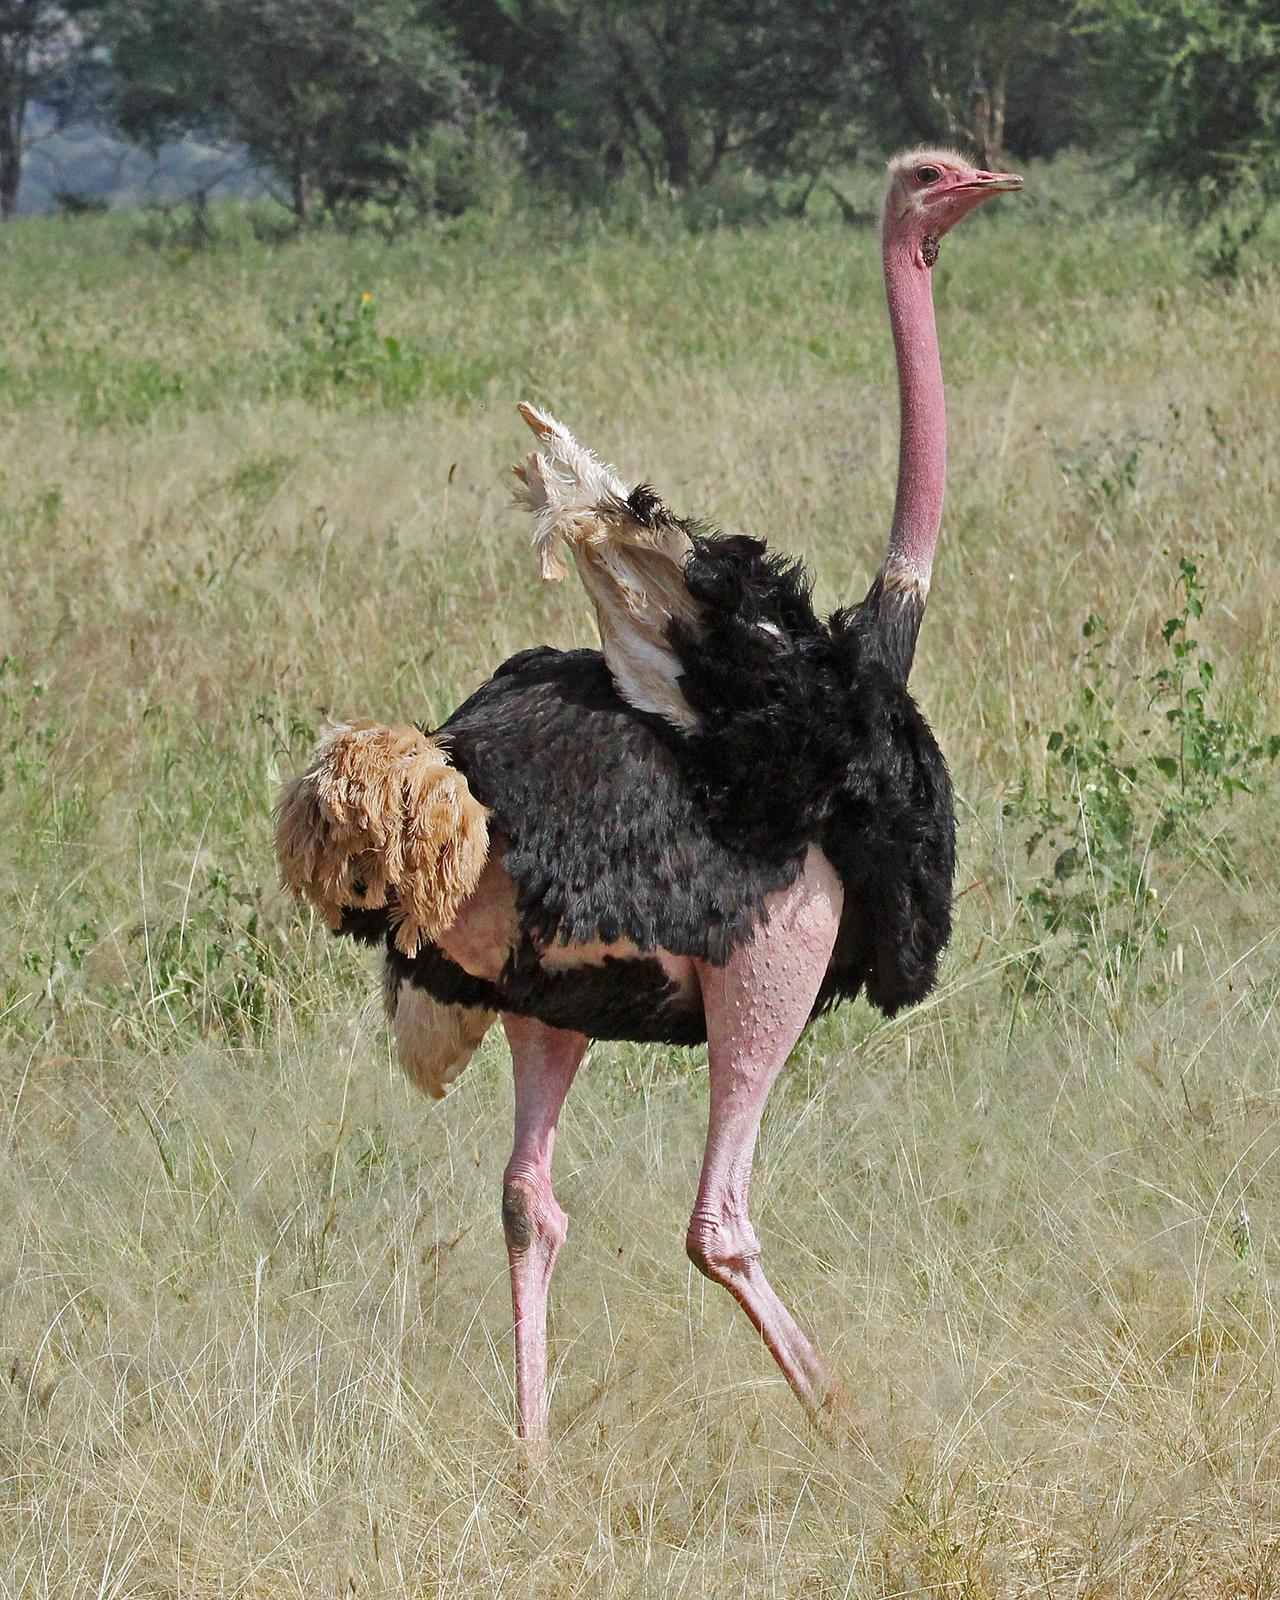 Common Ostrich Photo by Robert Polkinghorn